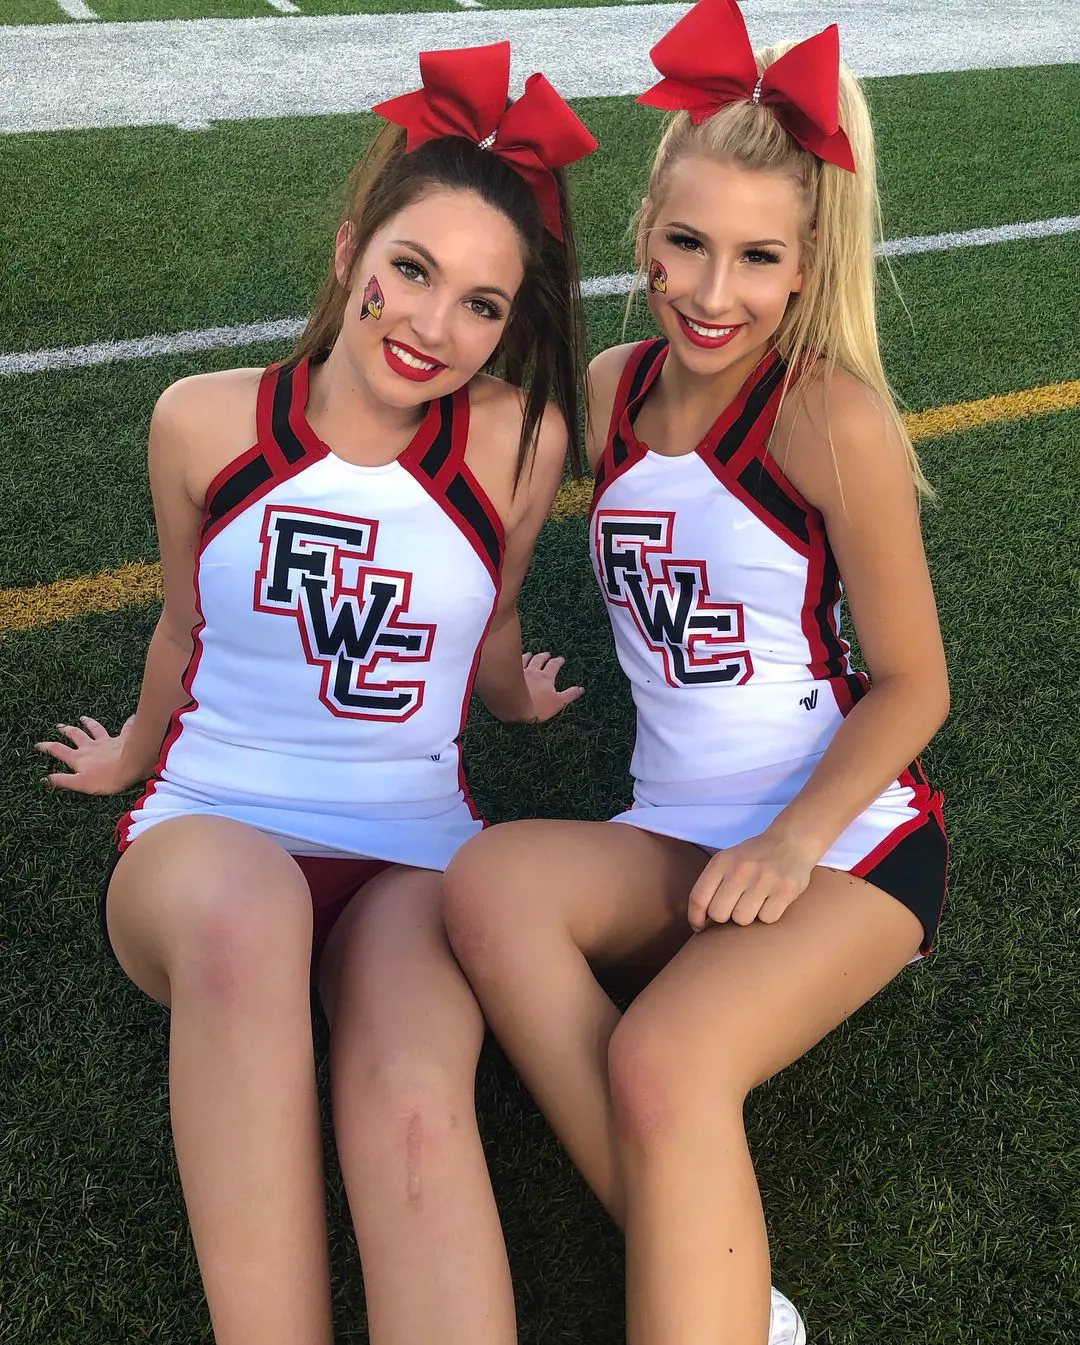 McKenna with her teammate donning cheerleader custom in the ground of Fort Worth Christian School in September 2018